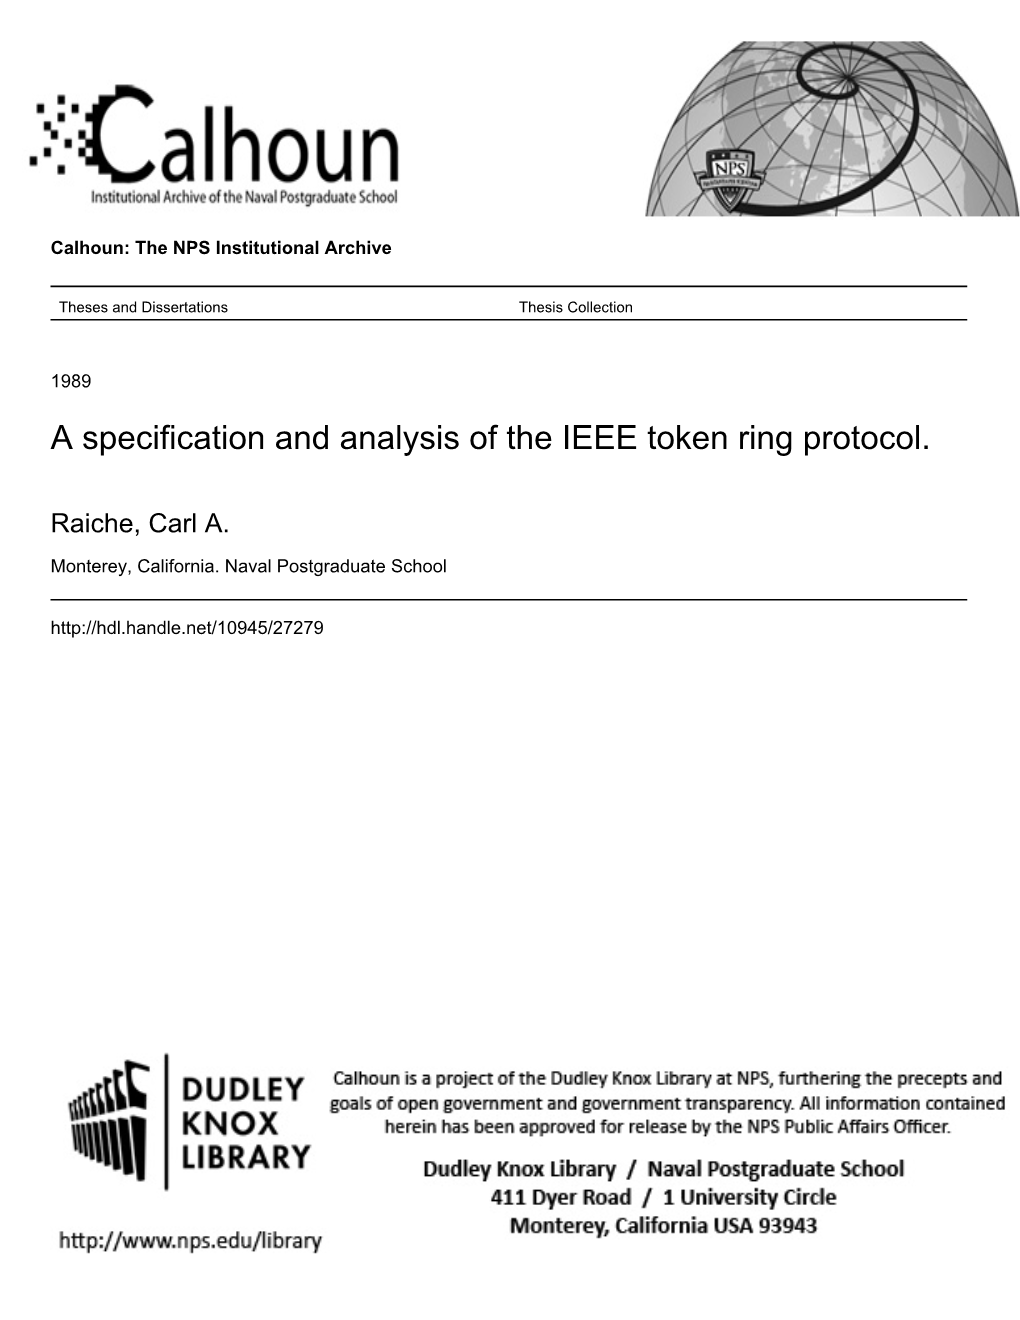 A Specification and Analysis of the IEEE Token Ring Protocol